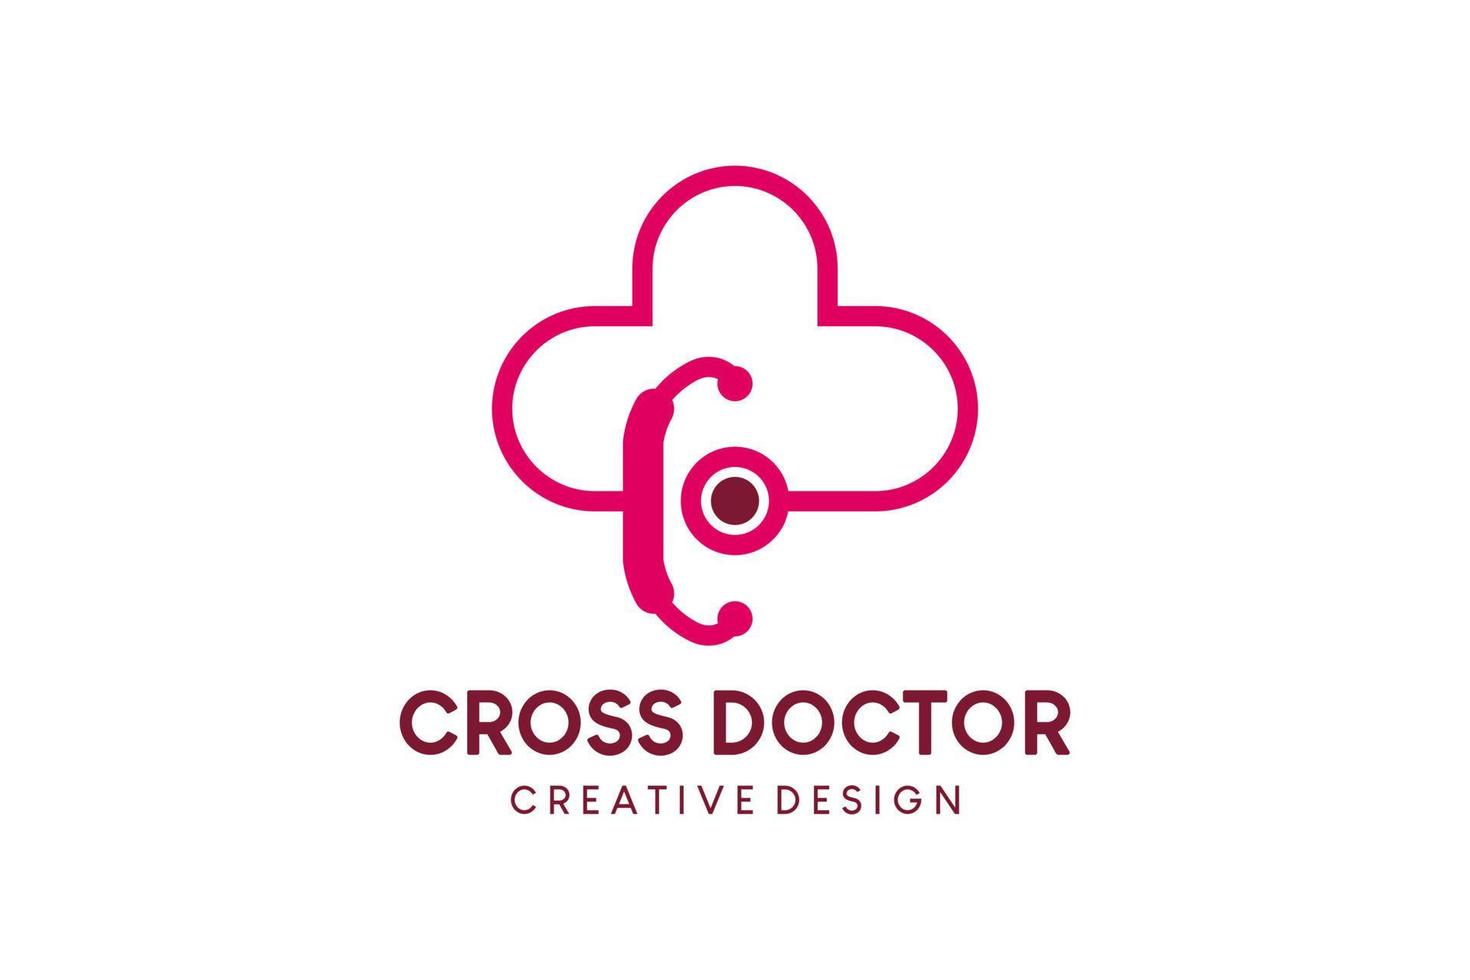 Doctor cross logo design, medical plus icon logo with stethoscope combined with plus icon vector